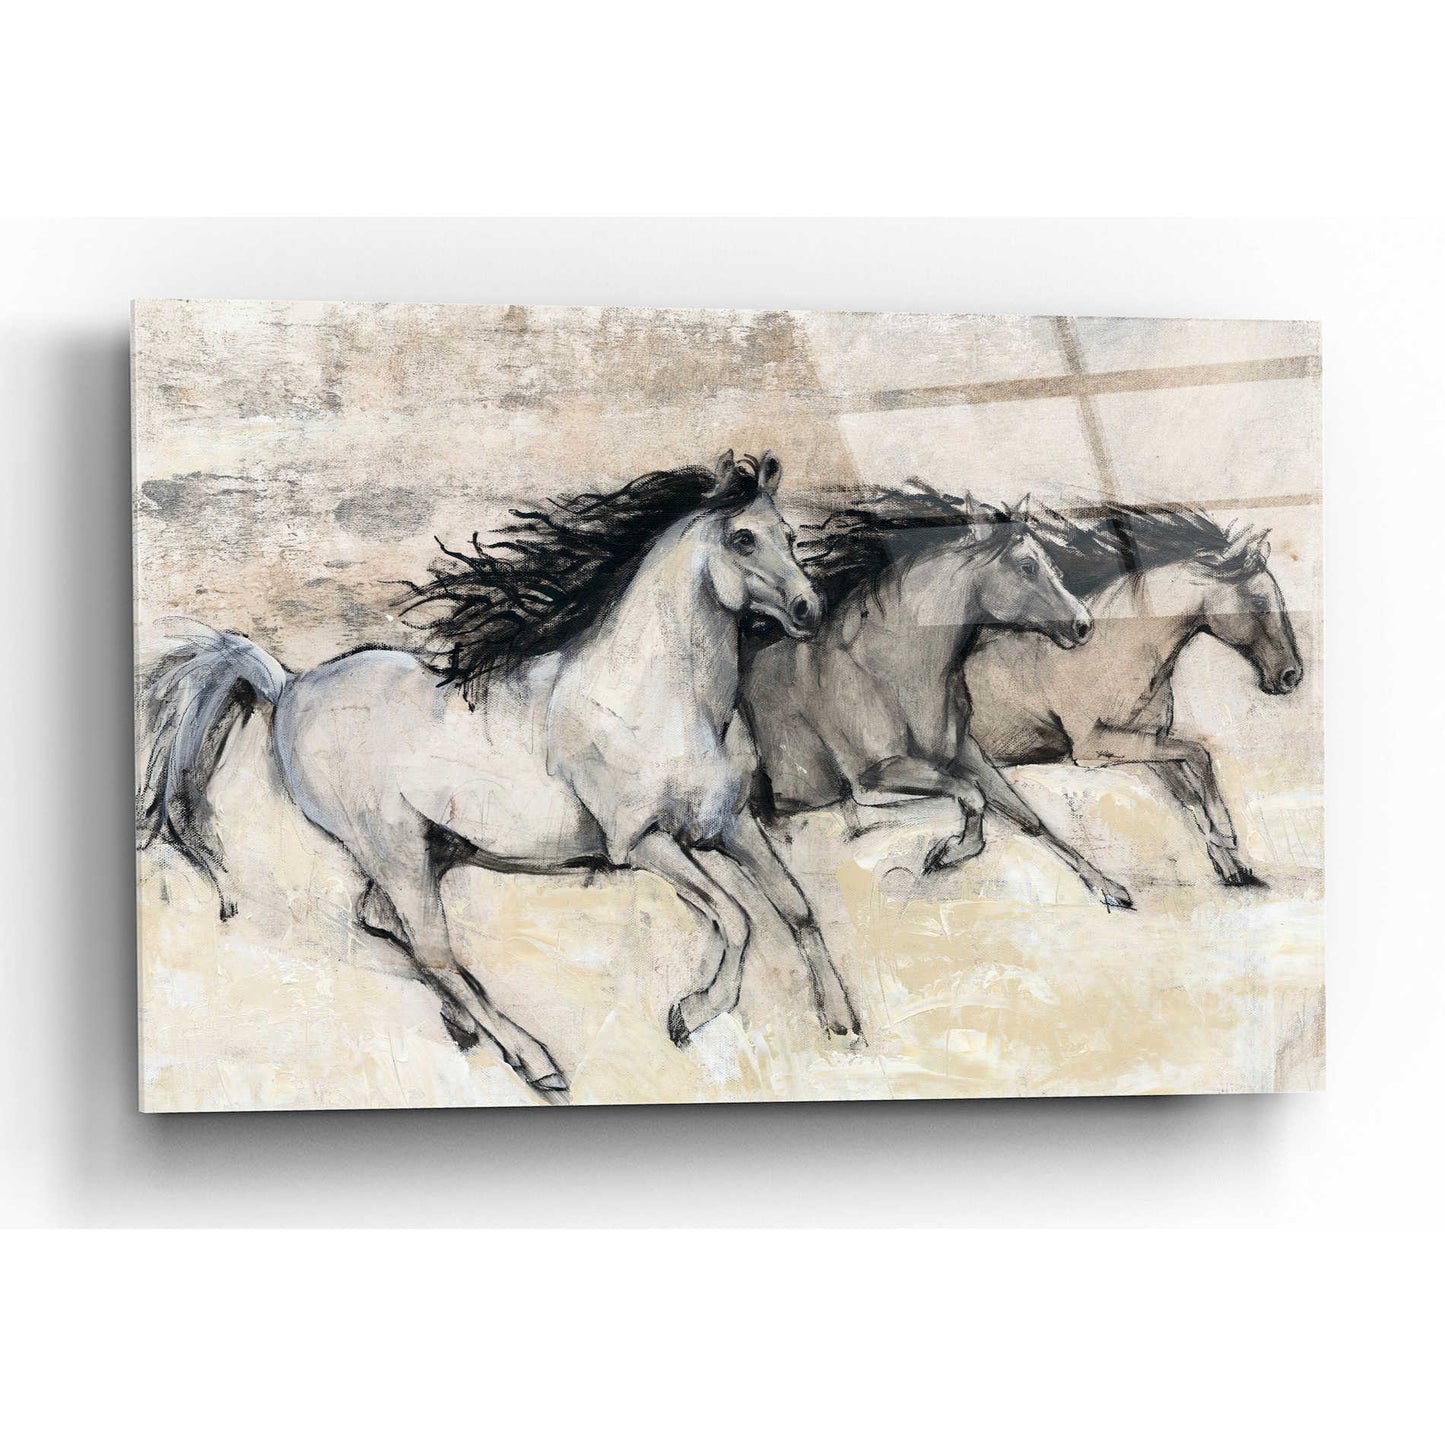 Epic Art 'Horses in Motion II' by Tim O'Toole, Acrylic Glass Wall Art